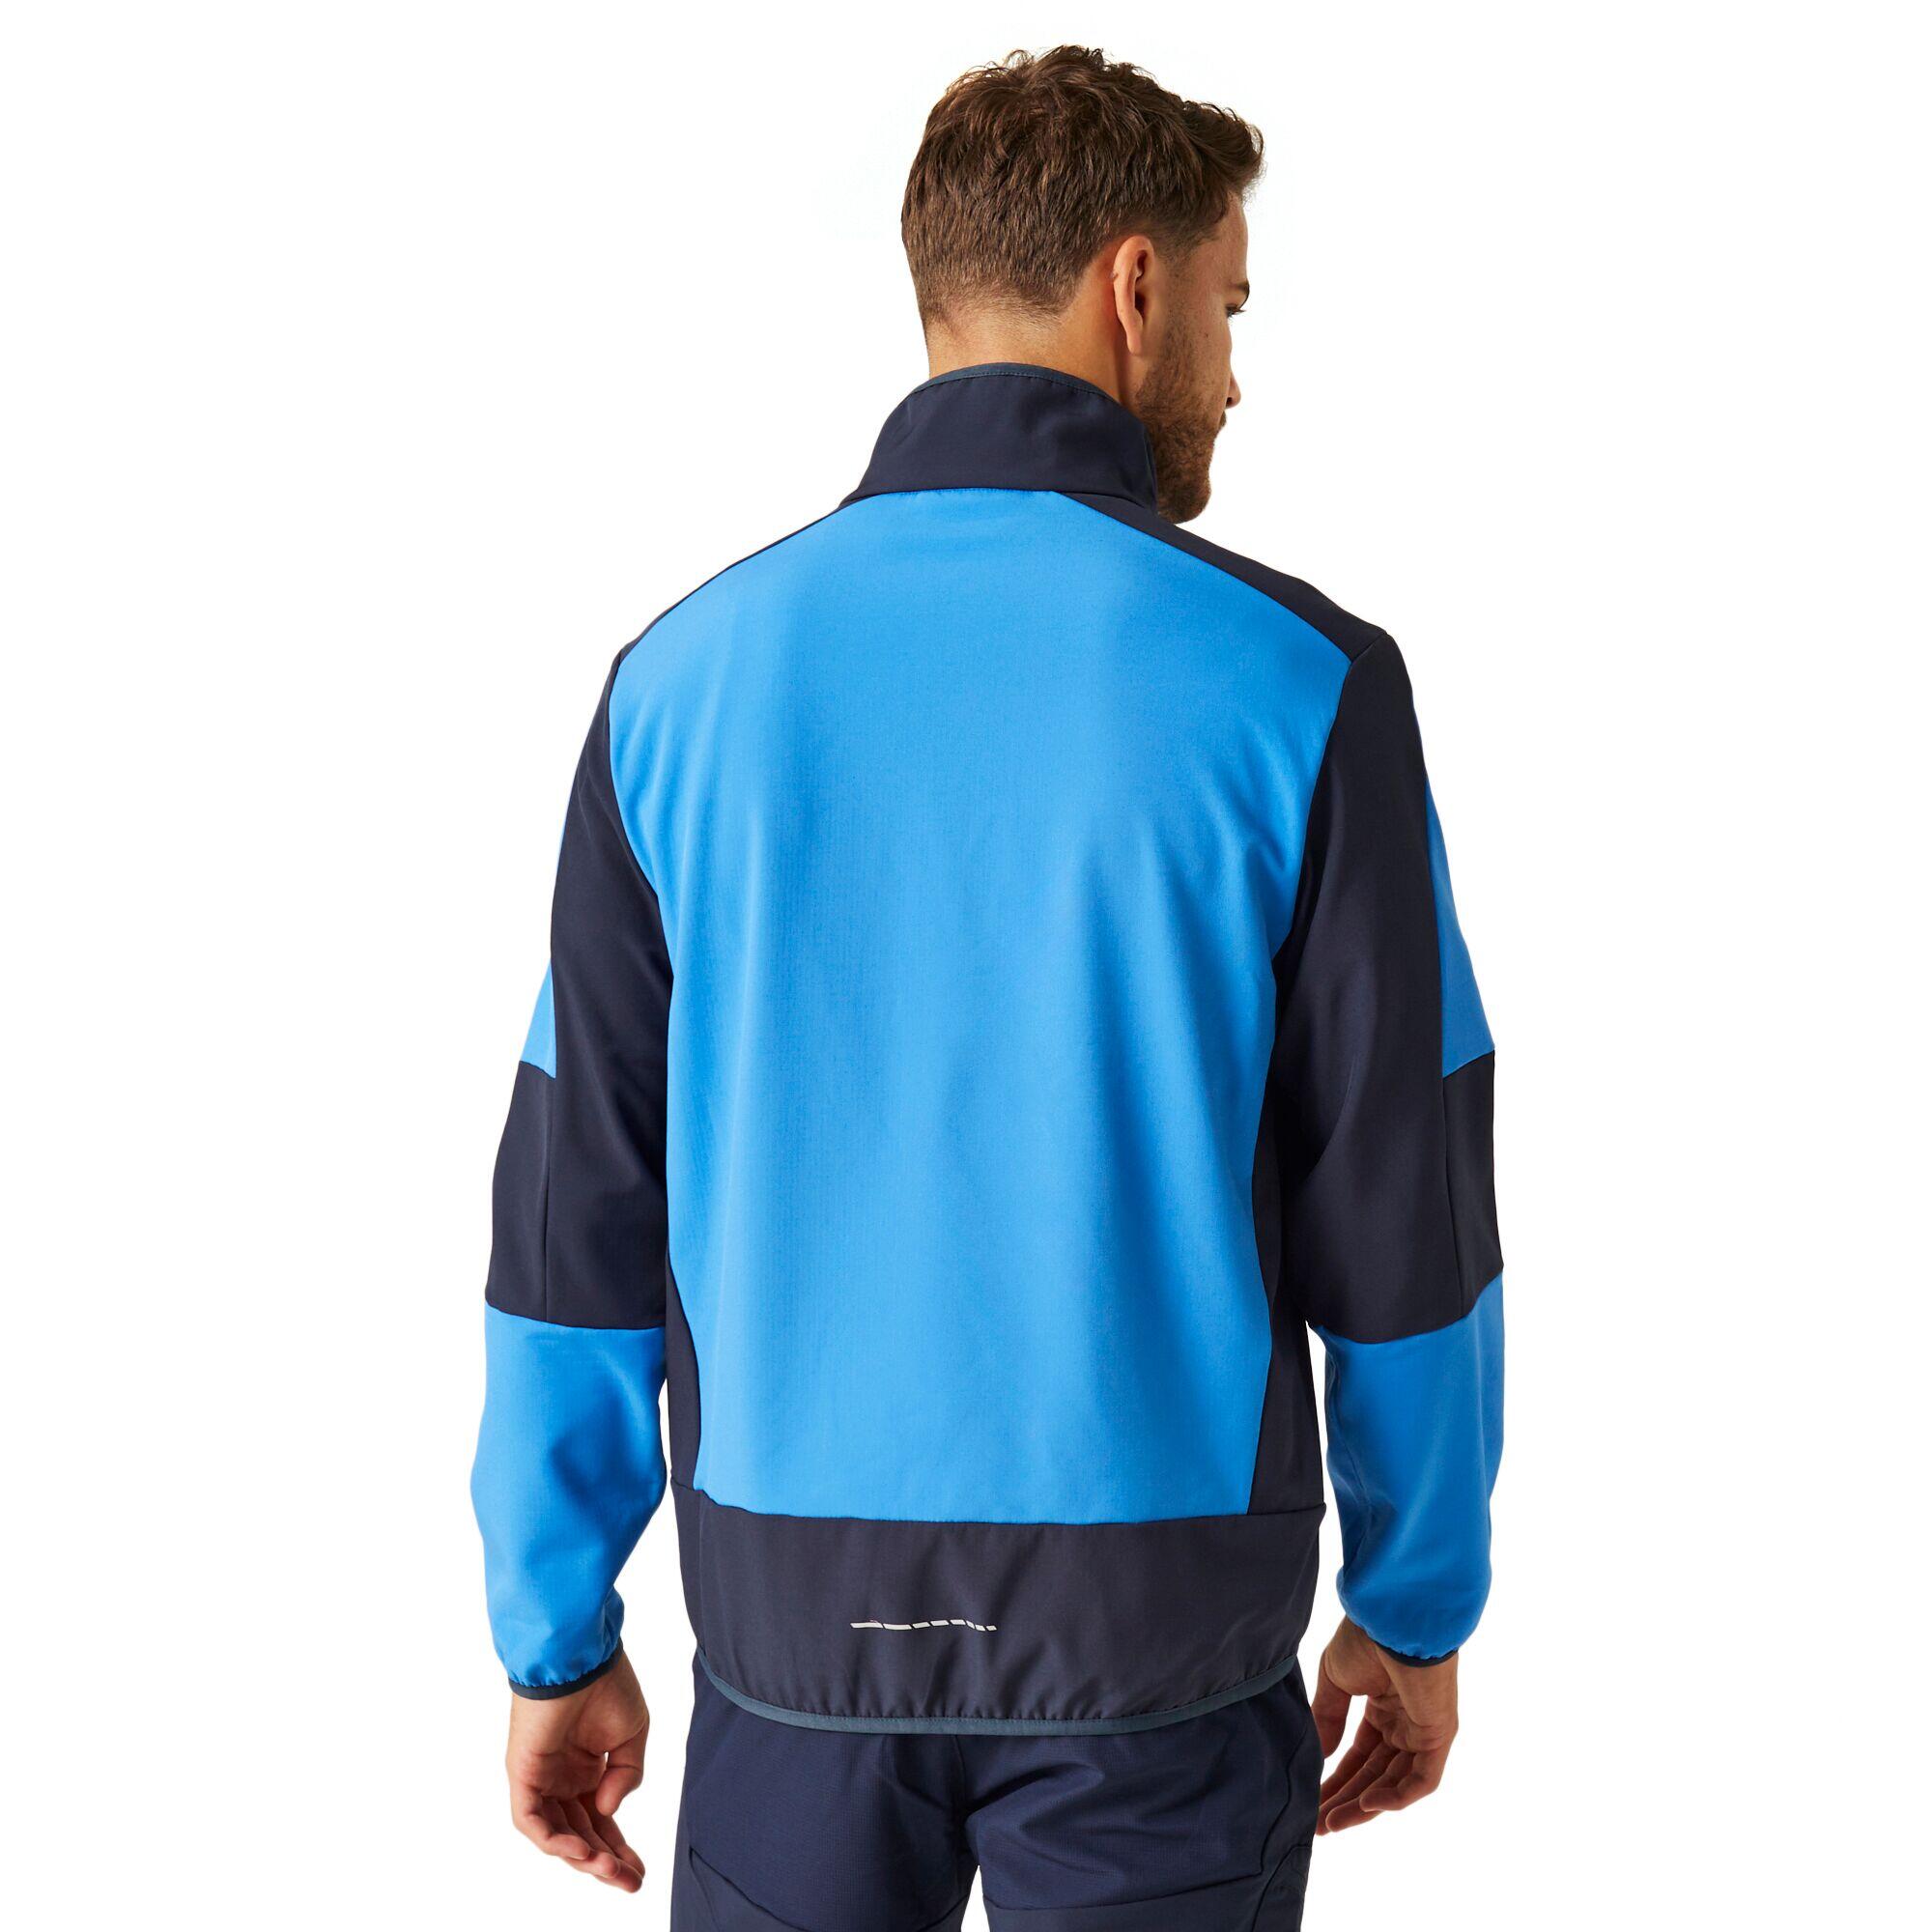 Unisex Adult EVolve 2 Layer Soft Shell Jacket (Strong Blue/Navy) 4/5